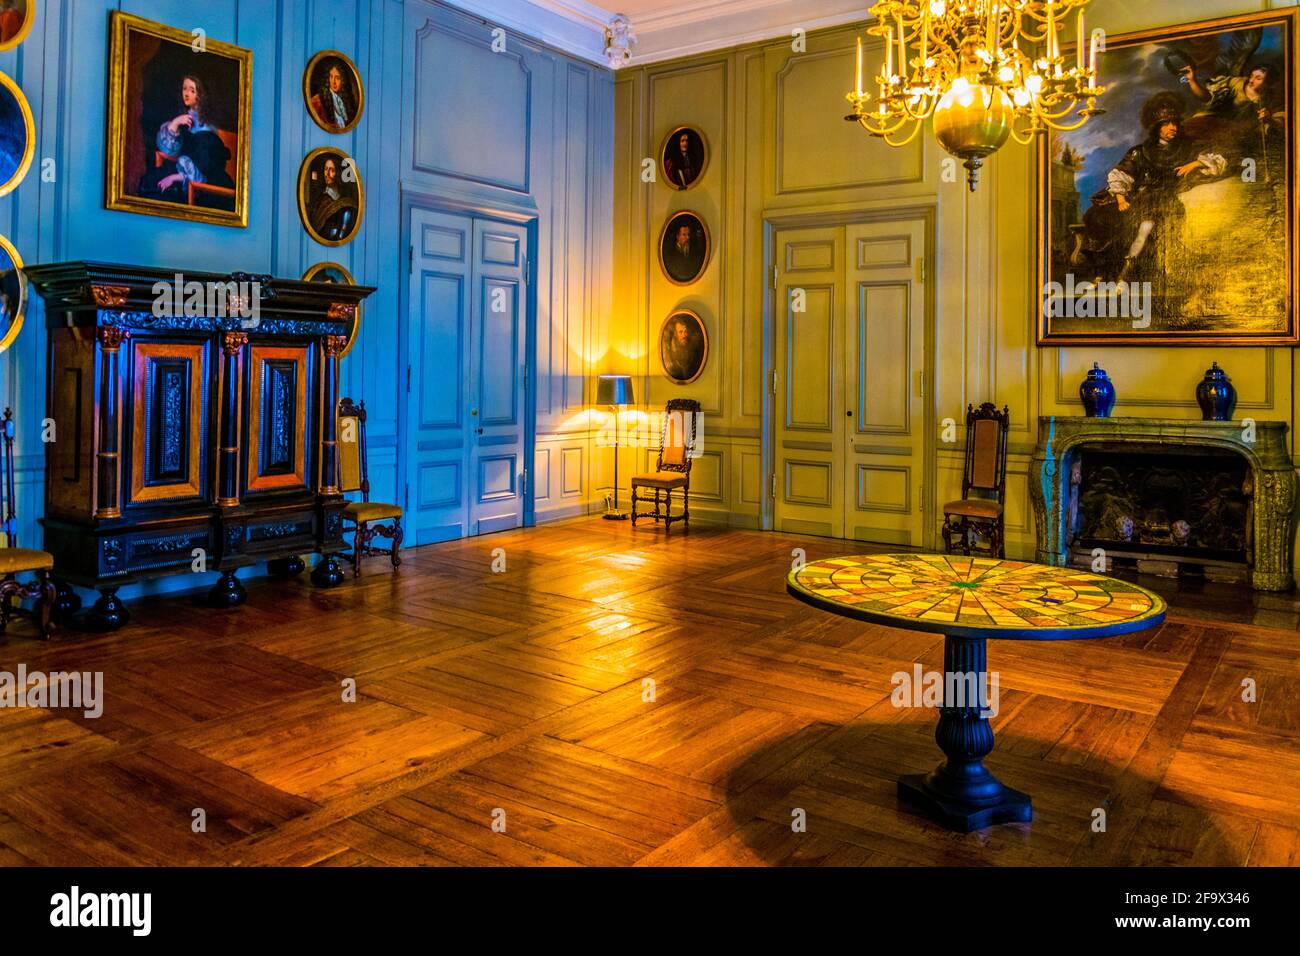 STOCKHOLM, SWEDEN, AUGUST 18, 2016: View of a chamber of the Kungliga slottet castle in Gamla Stan, Stockholm, Sweden Stock Photo